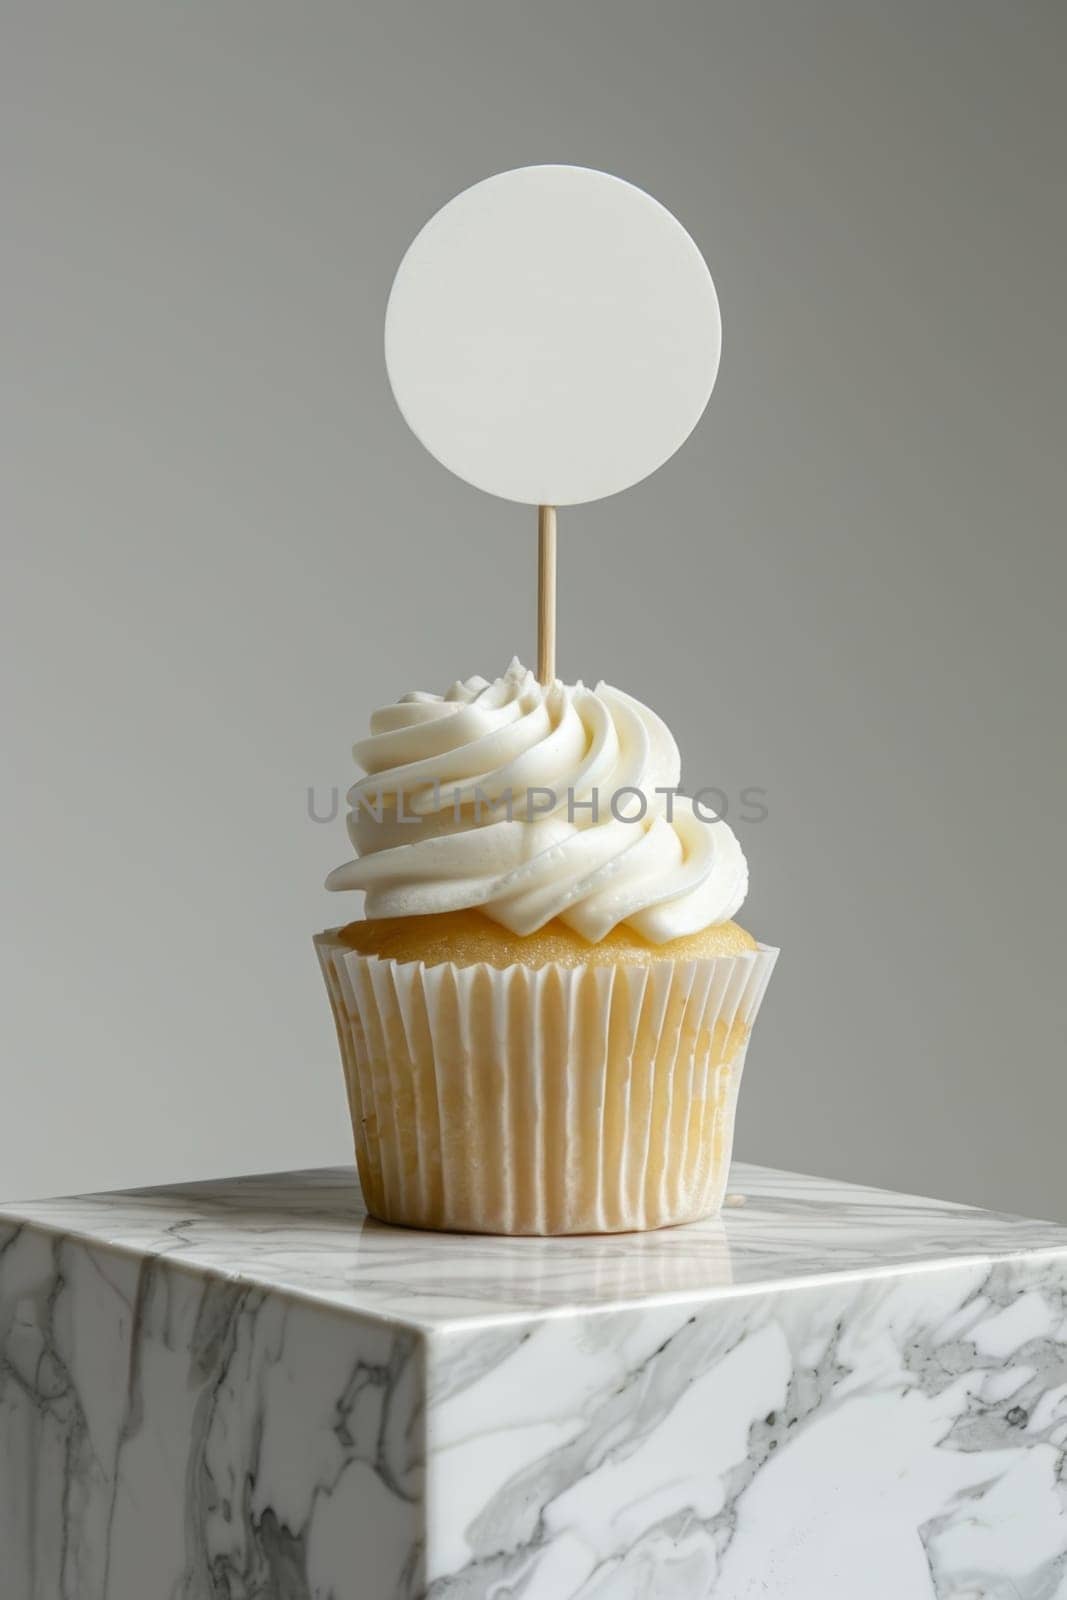 Cupcake with white cream and an inscription plate on a white background by Lobachad